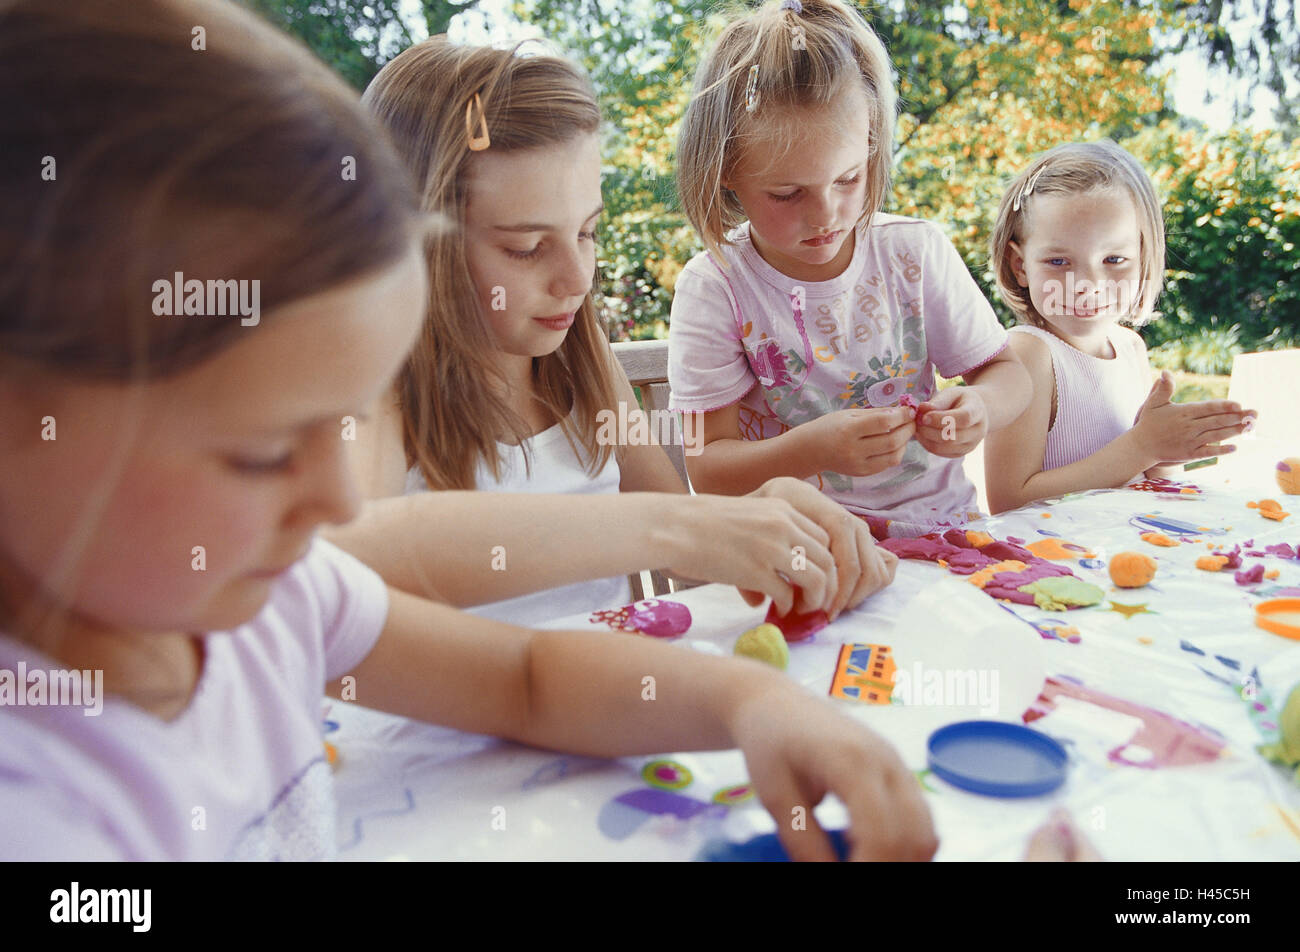 Girls, smile, do handicraft, plasticine, terrace table, person, children, siblings, friends, together, leisure time, creativity, knead, group work, support, learn, play, fun, summer, outside, concentrates, terrace, four, activity, leisure activity, Stock Photo